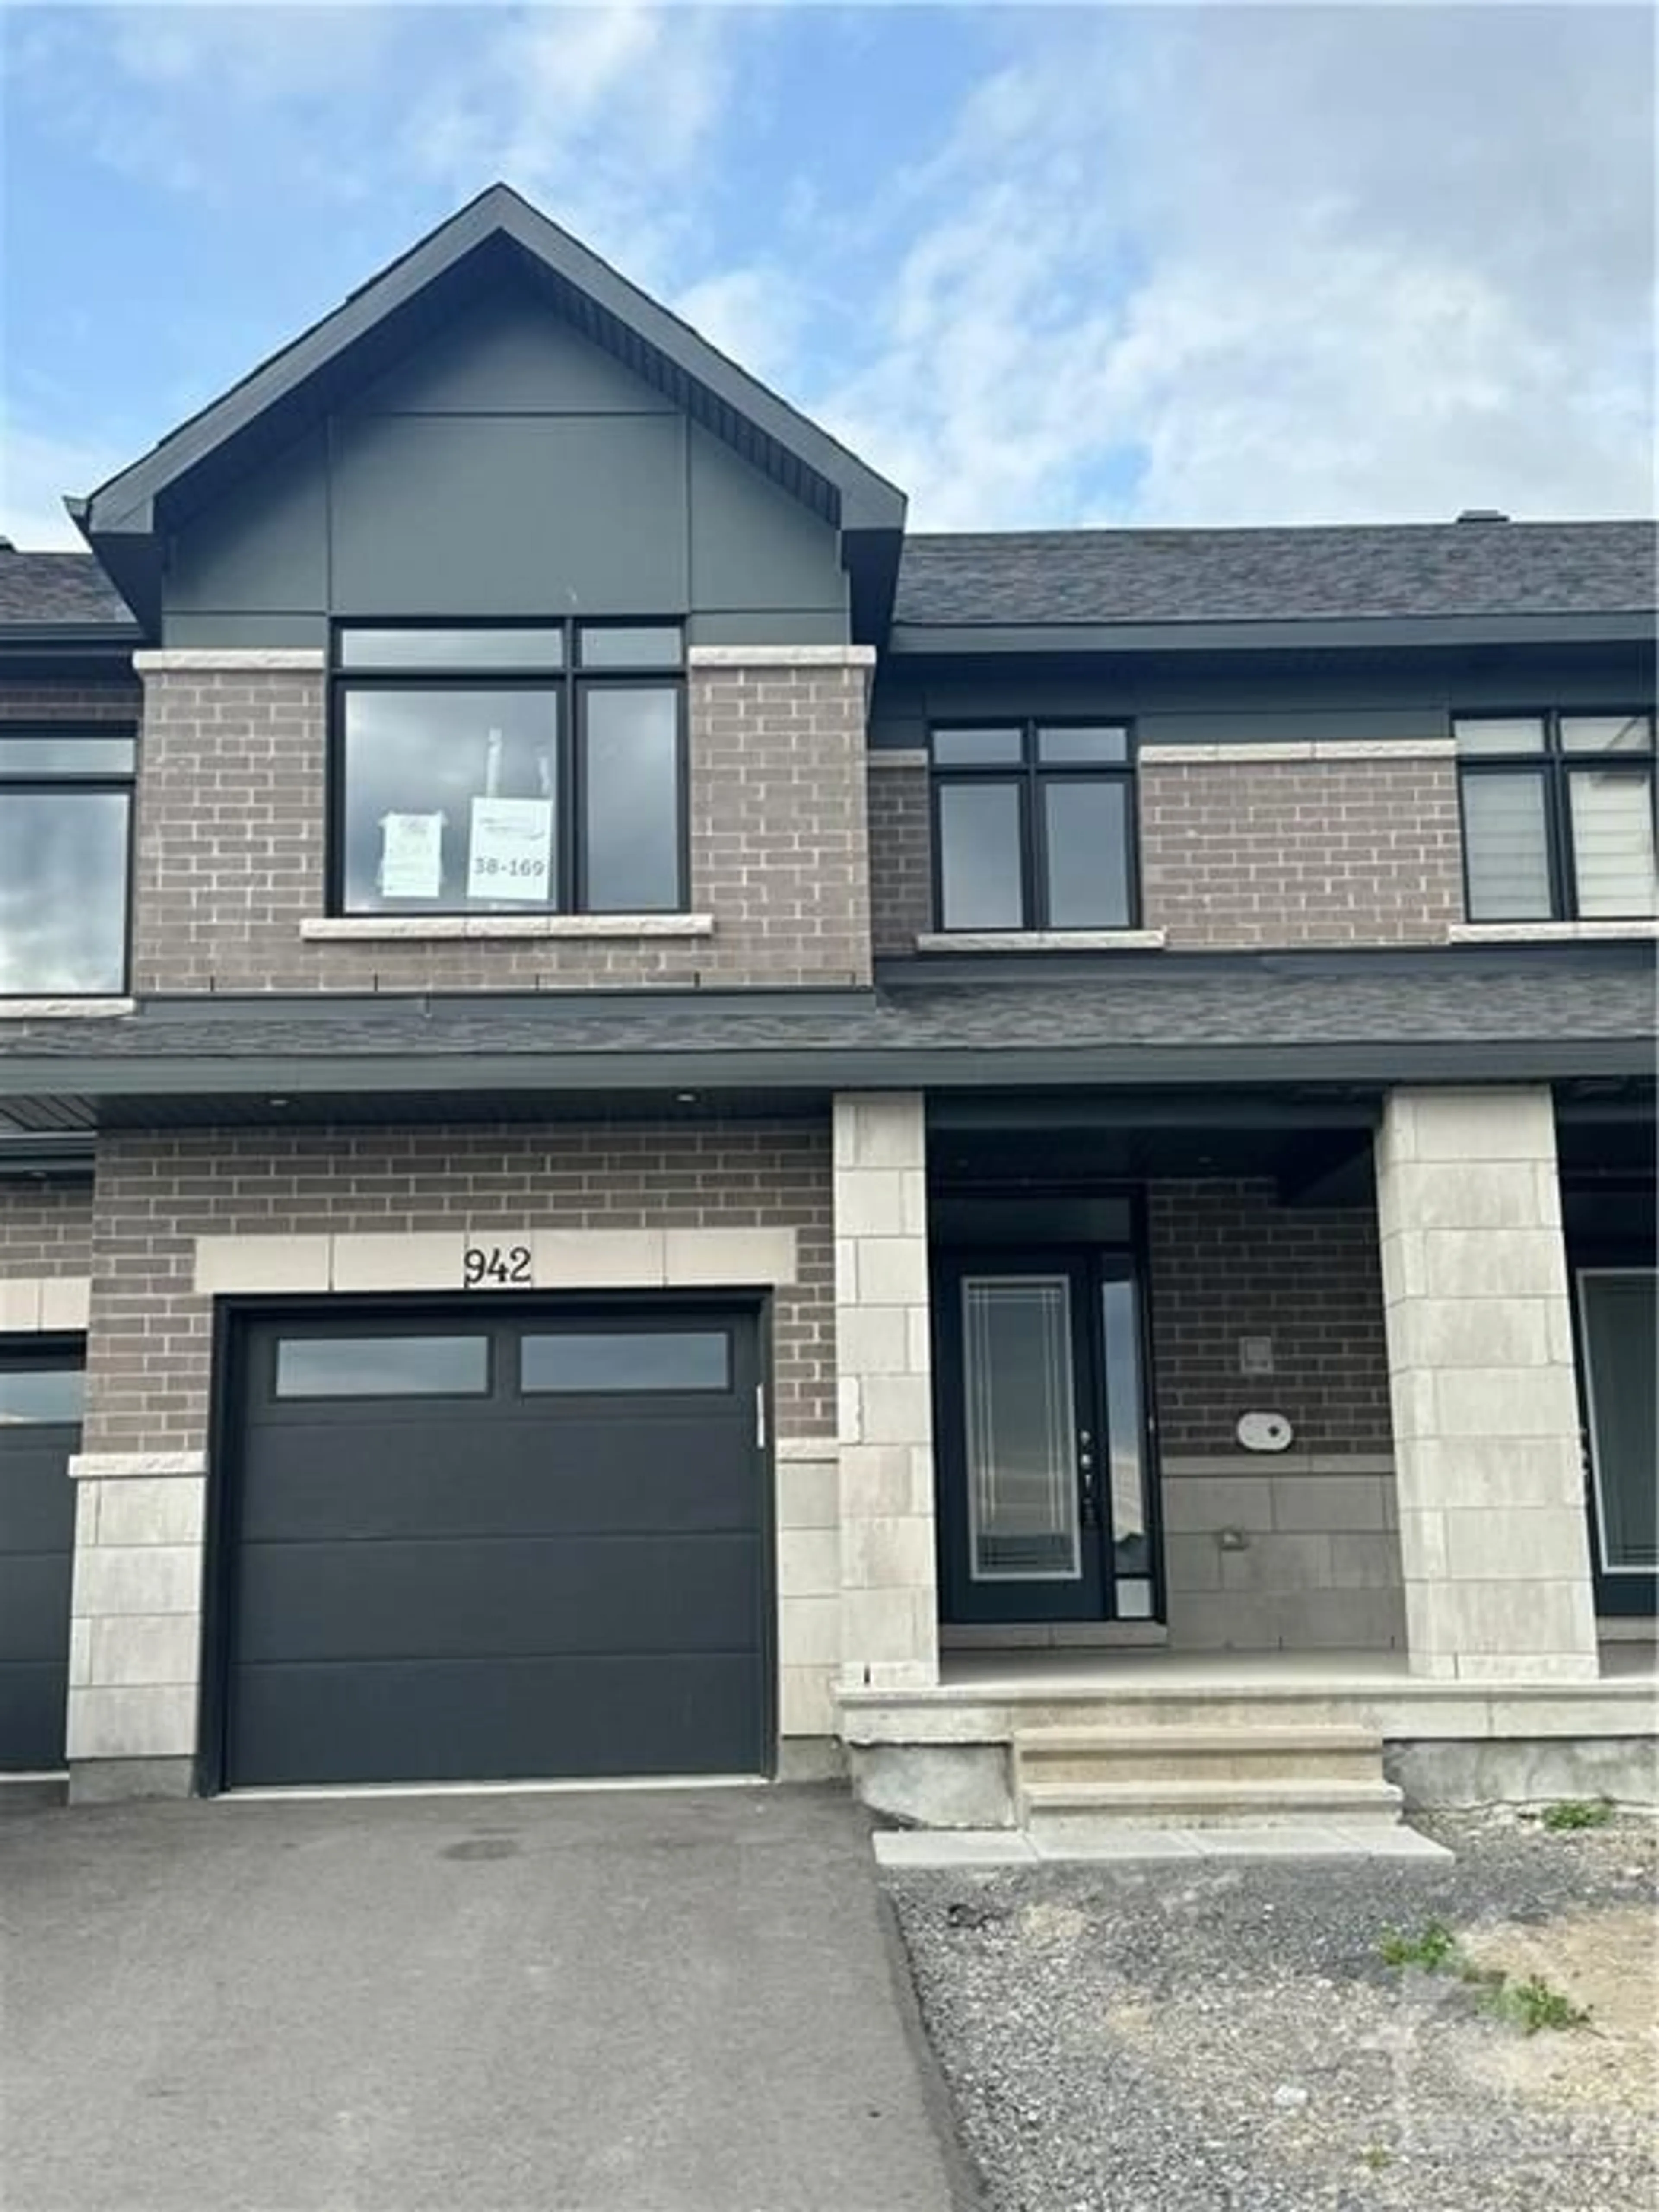 Home with brick exterior material for 942 BRIAN GOOD Ave, Ottawa Ontario K4M 0N7